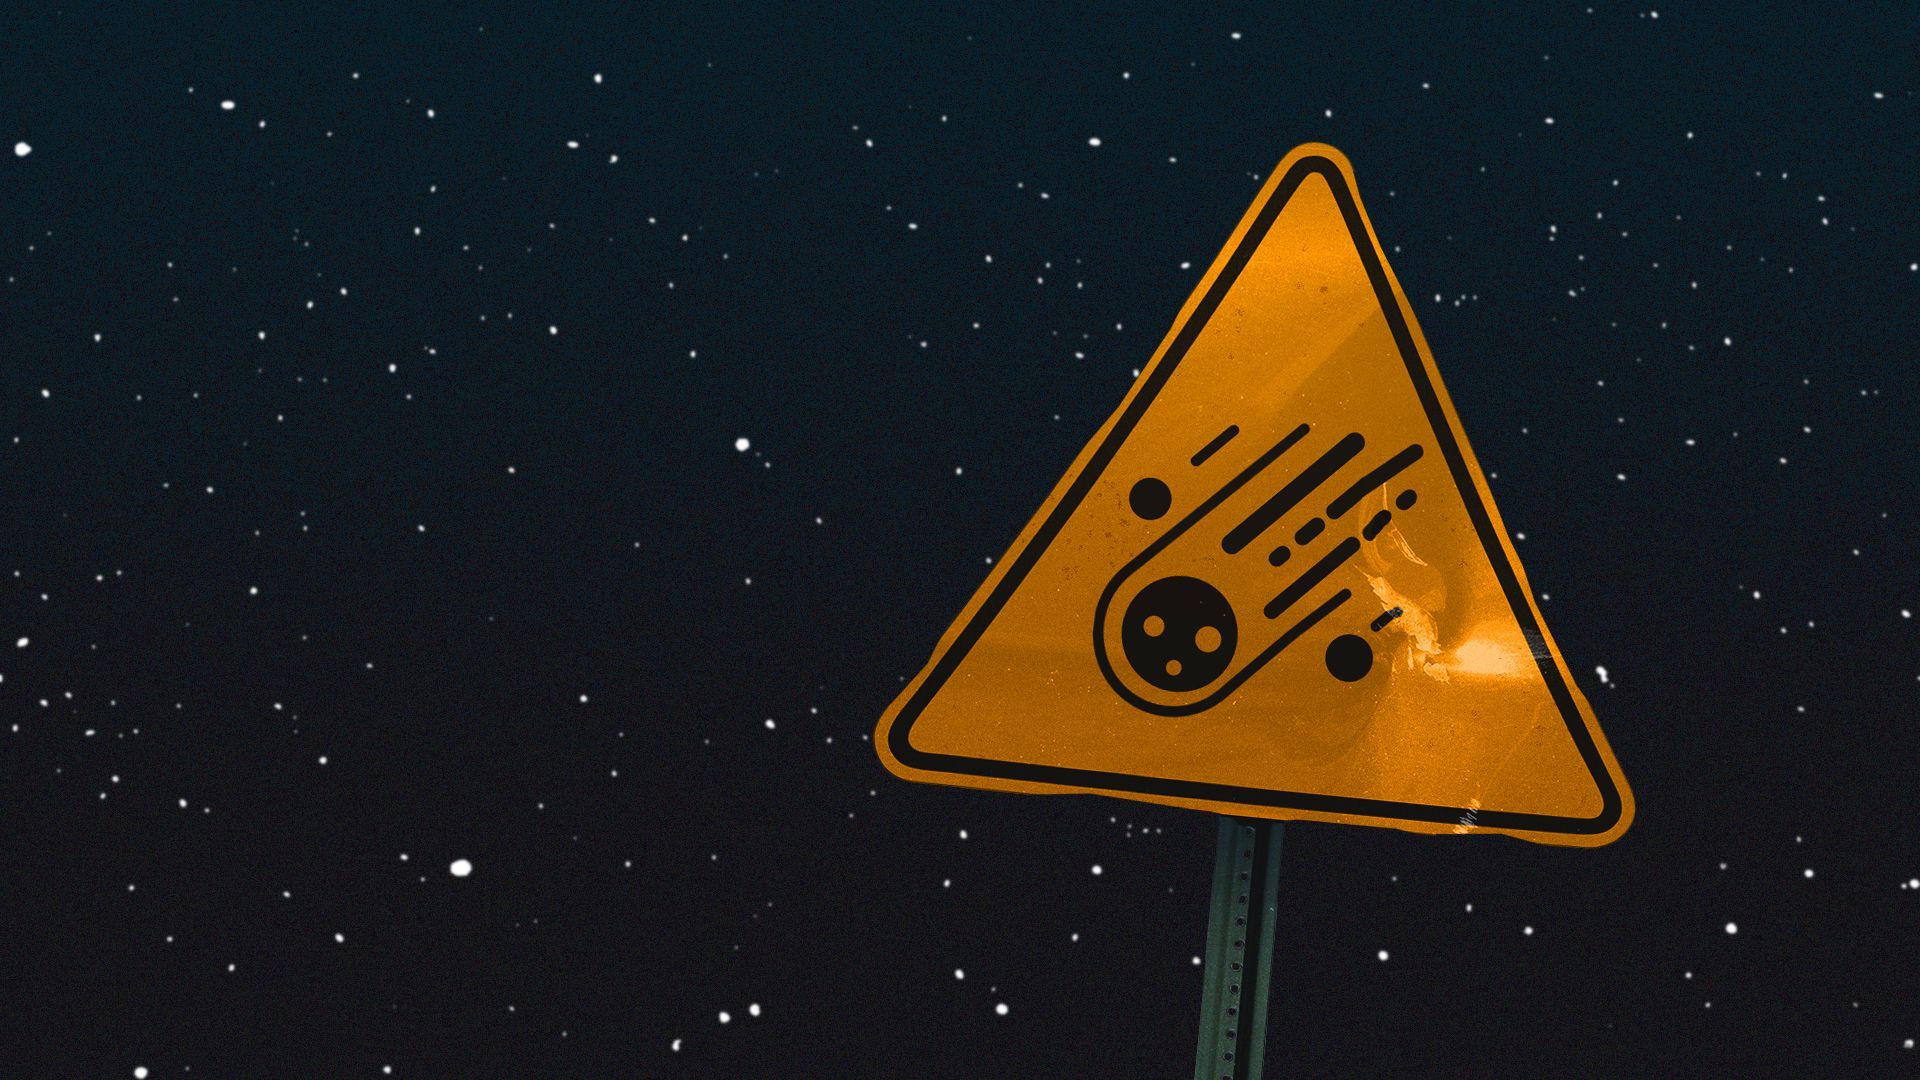 Illustration of a dented caution sign with an asteroid.